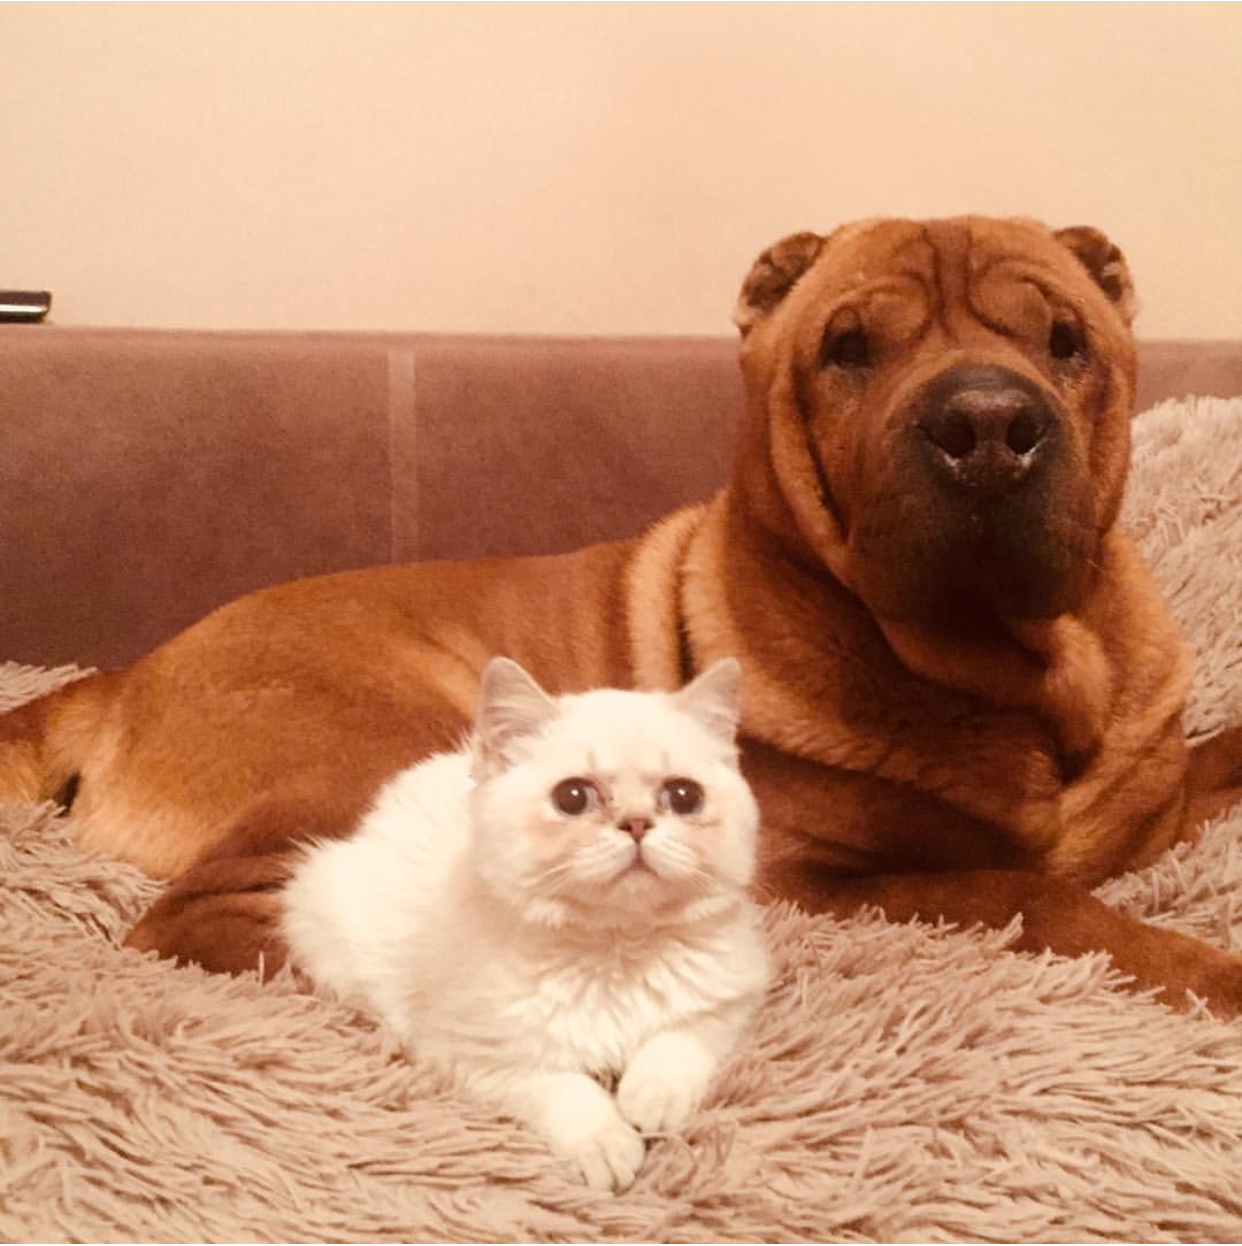 A Shar-Pei lying on the couch with a white cat